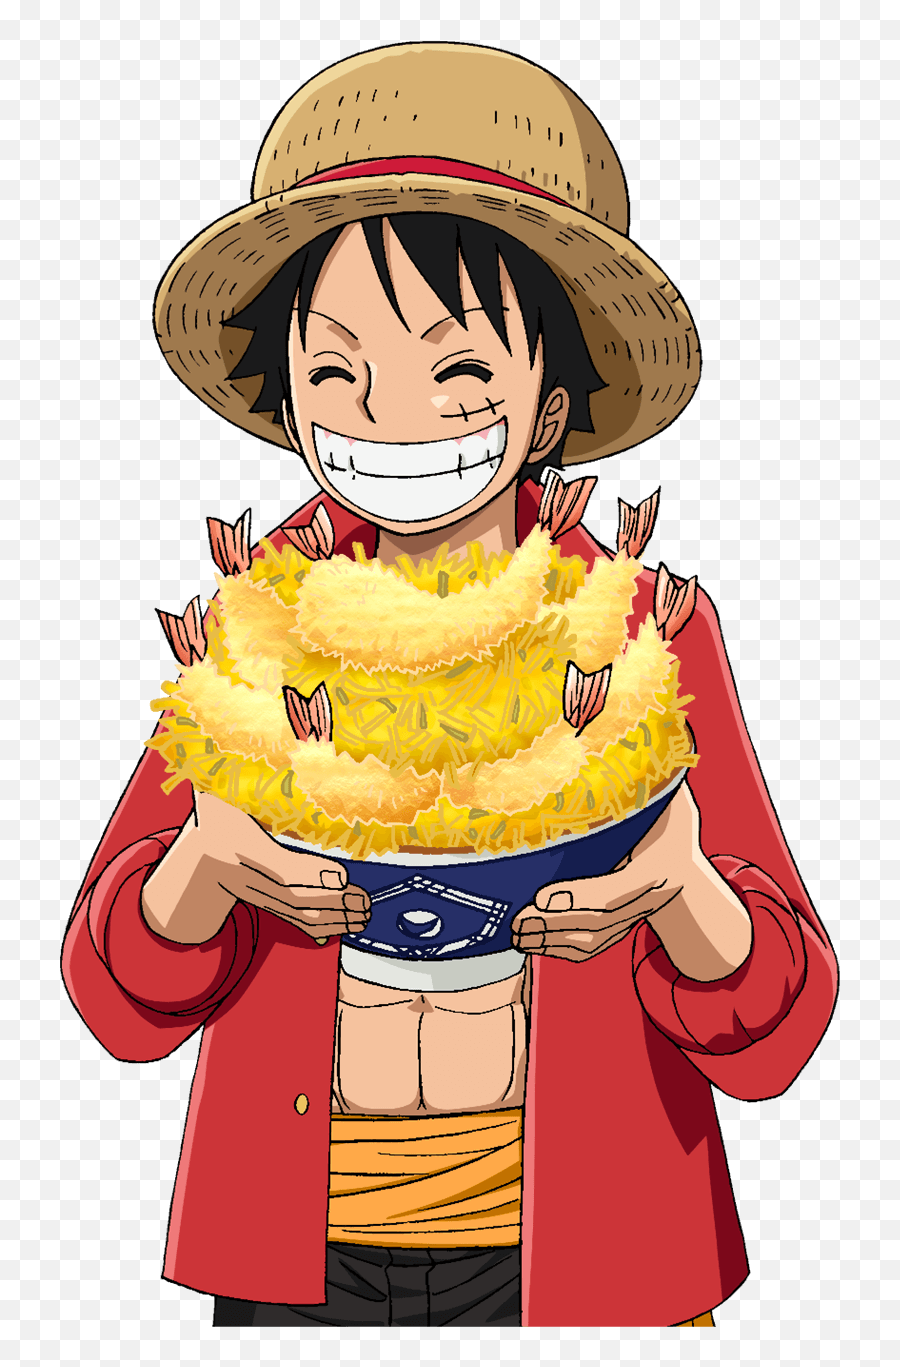 Monkey D Luffy - One Piece Image 3026349 Zerochan Png,Luffy Transparent -  free transparent png images 